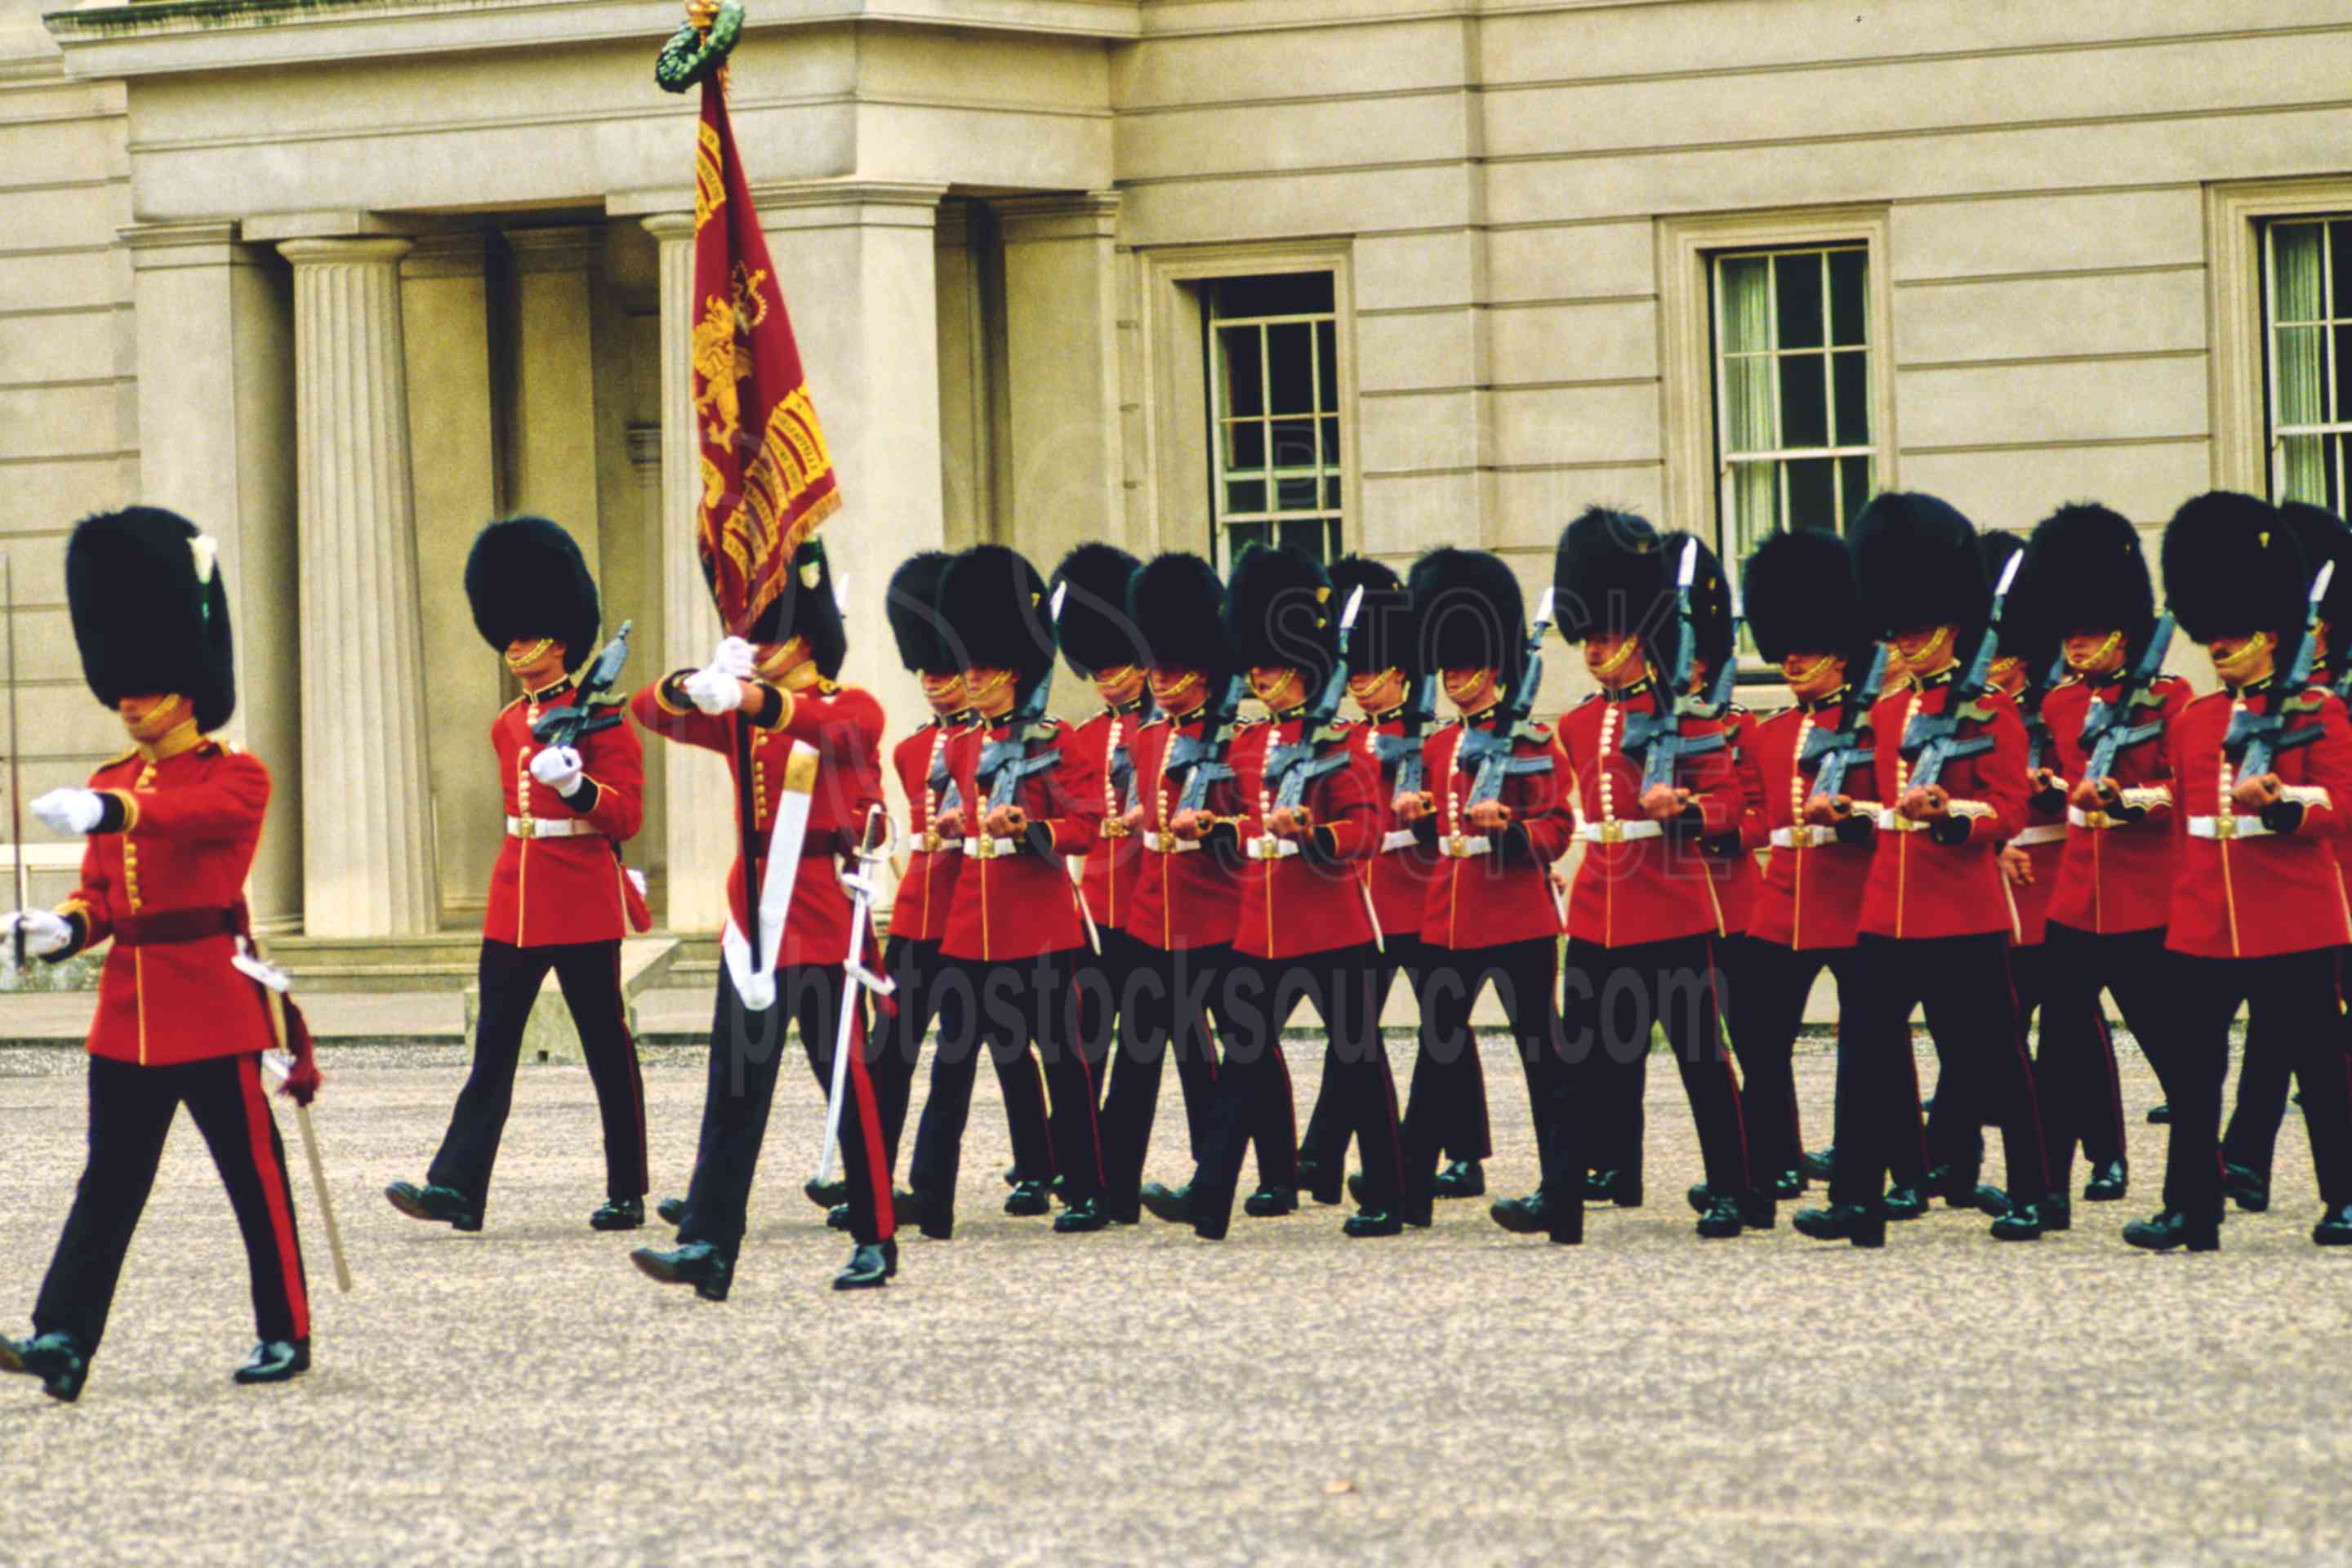 Changing of the Guard,europe,guard,uniform,england museums